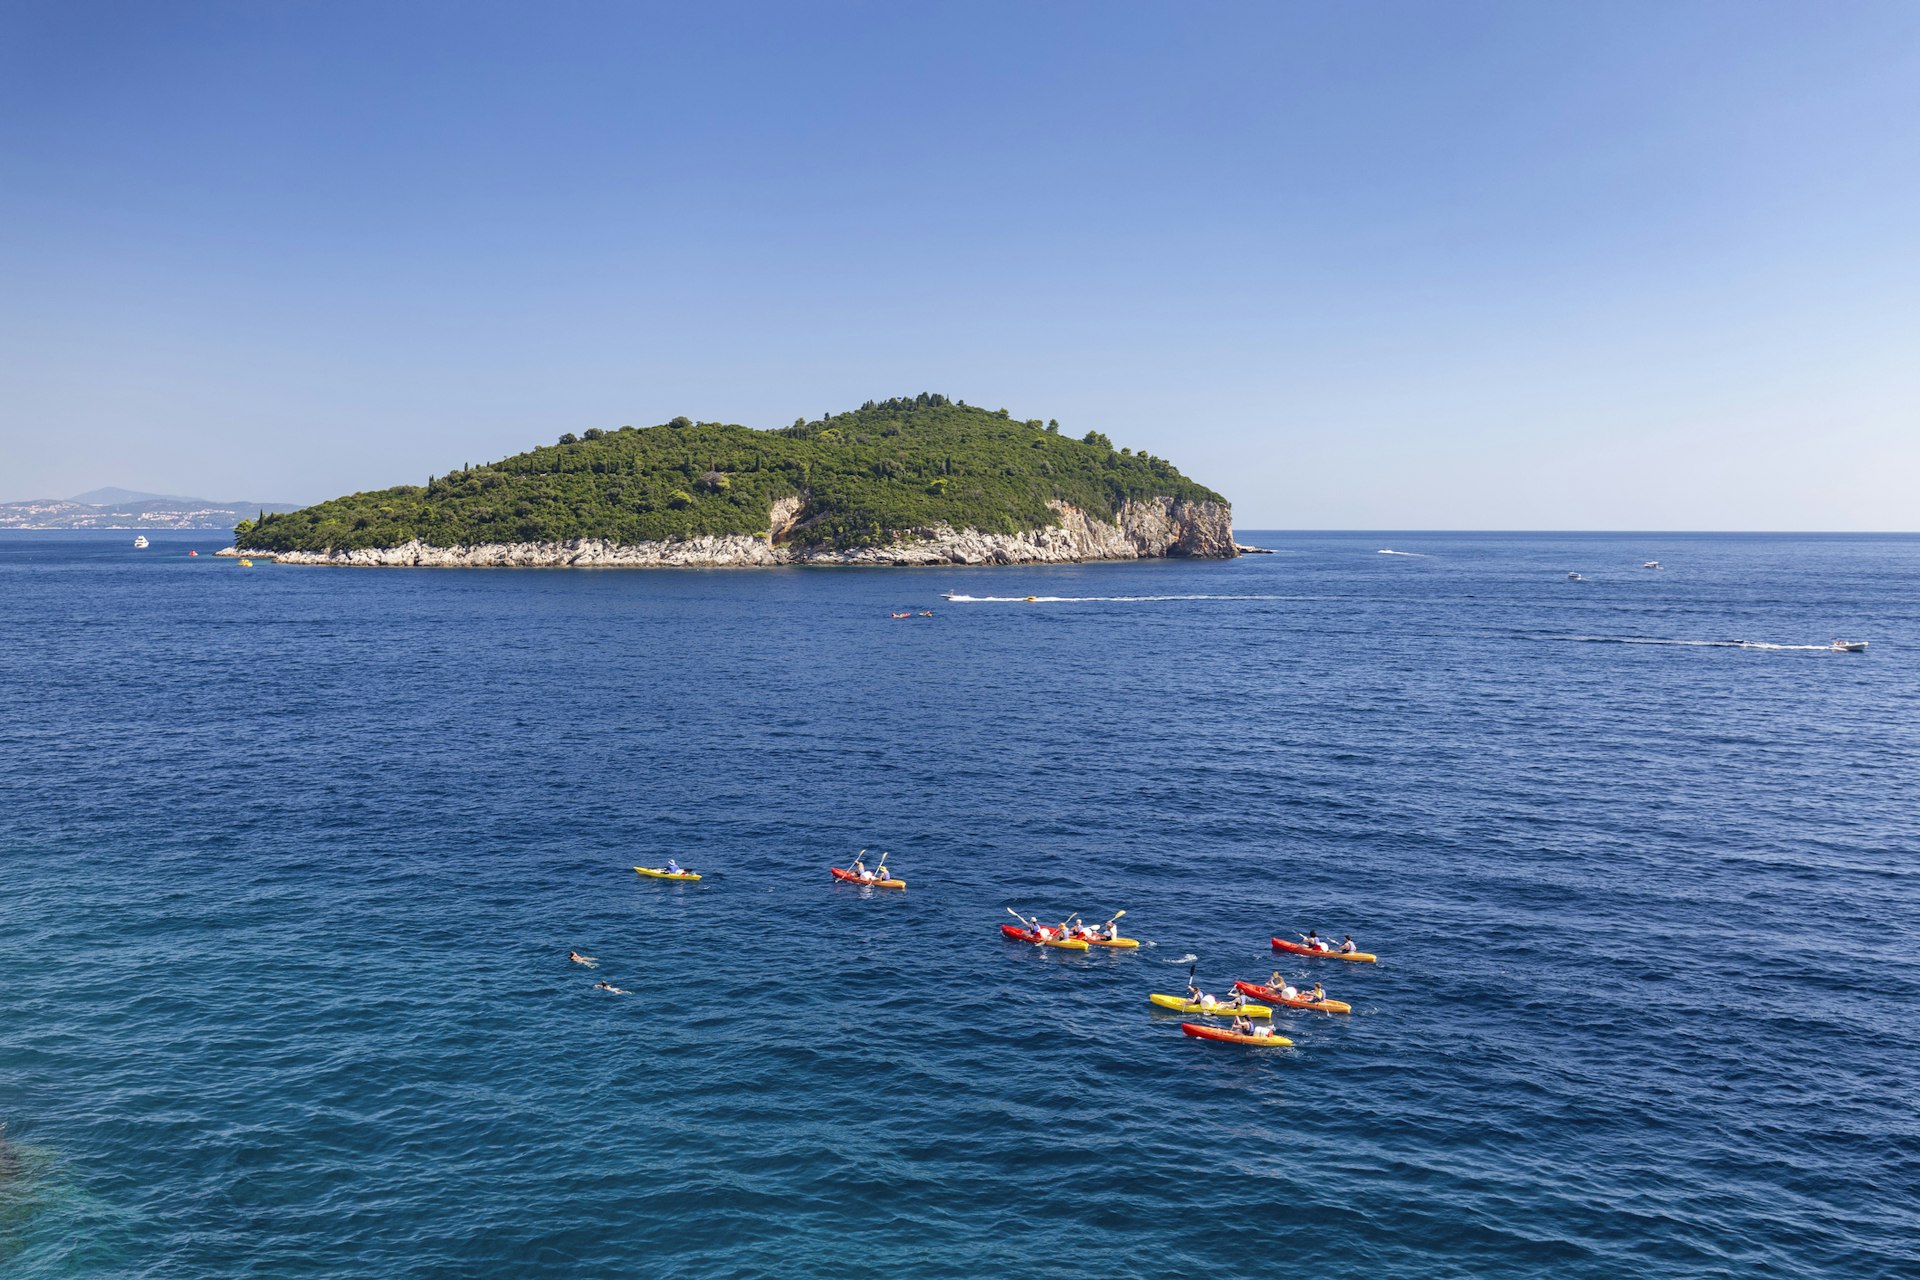 Yellow and red kayaks out at sea heading towards a forested island, Lokrum, off the coast of Dubrovnik